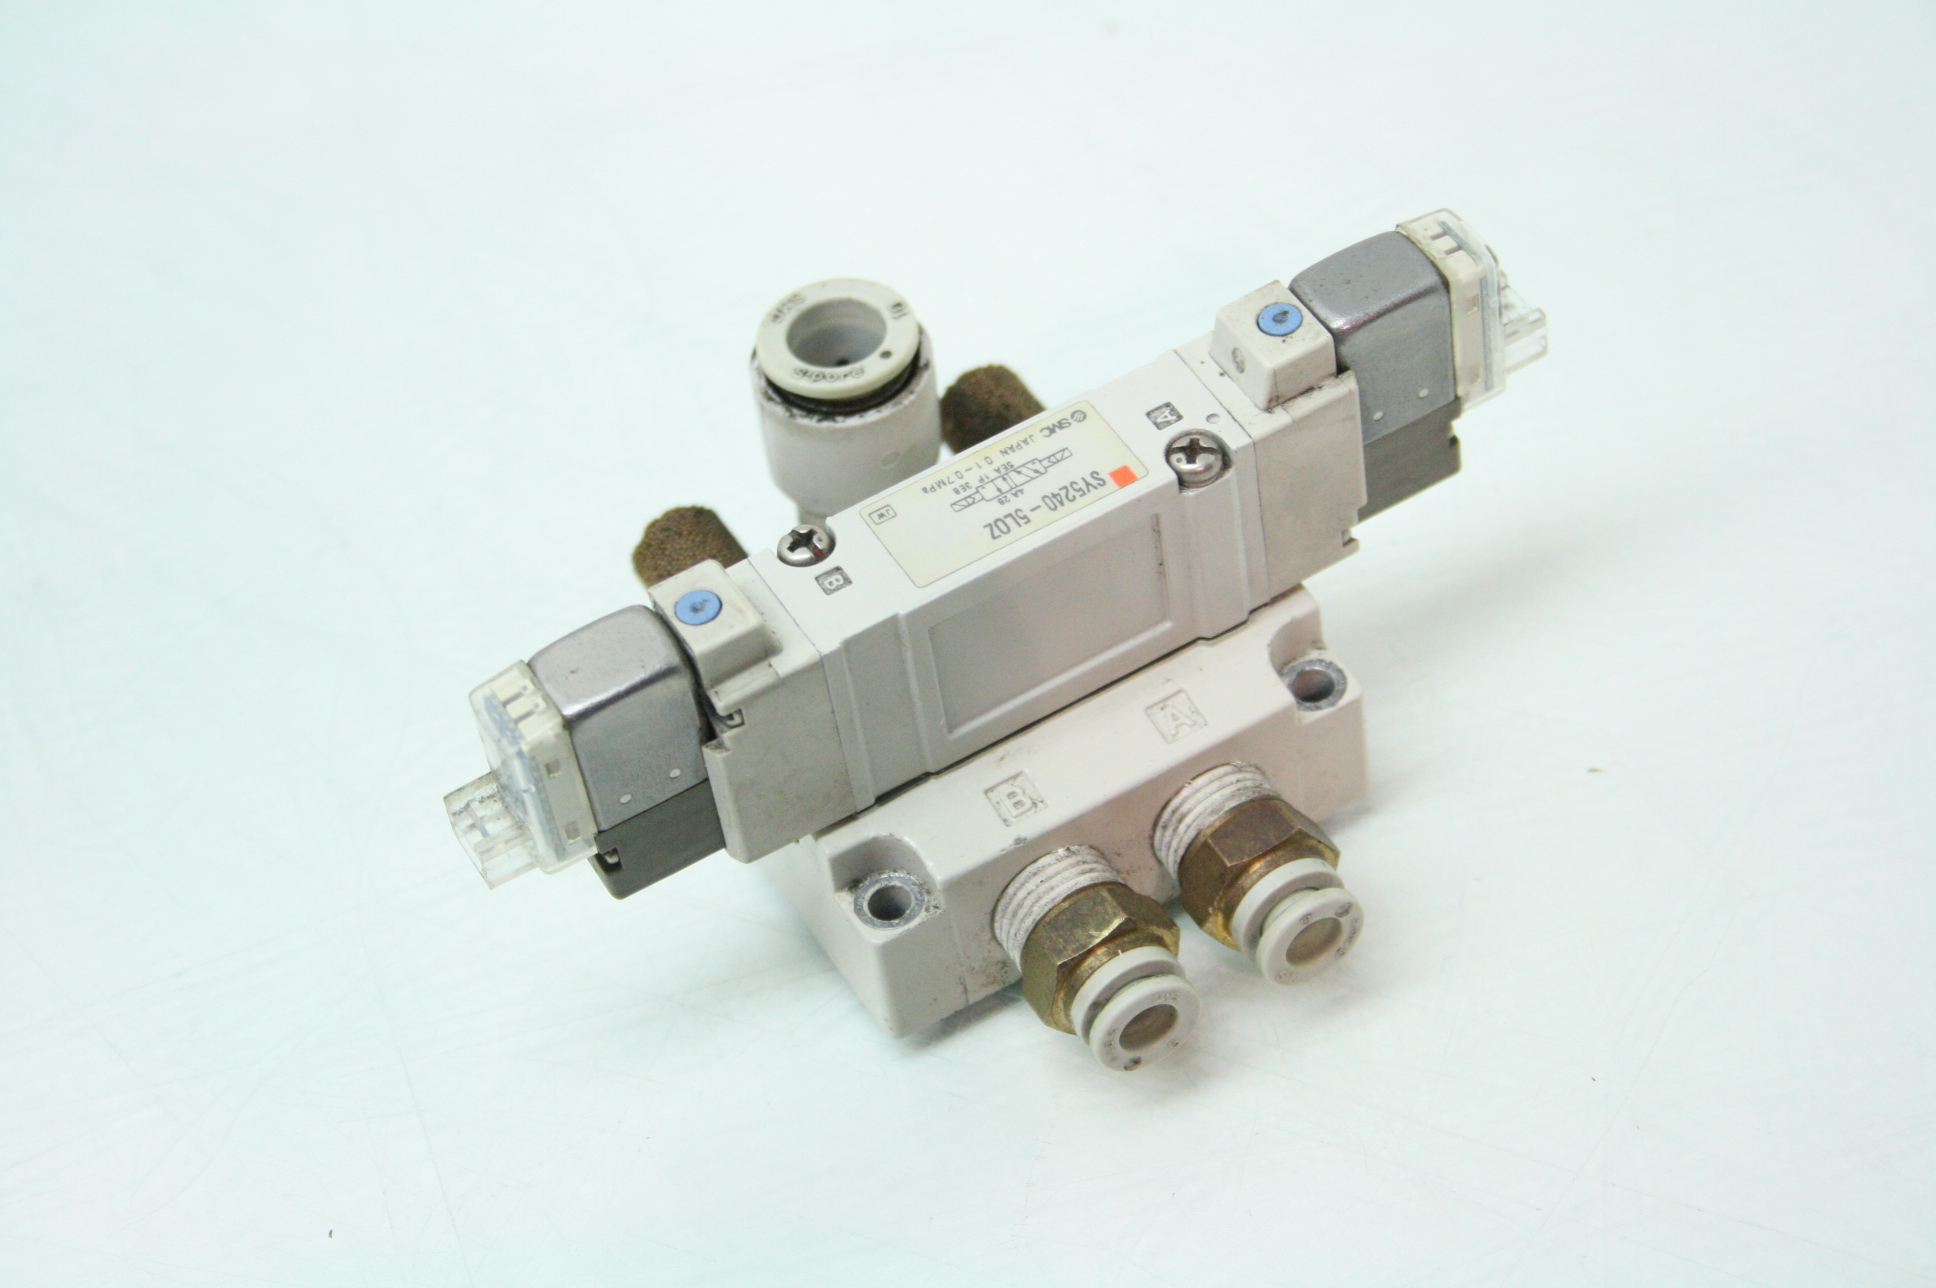 SMC Manifold SY5240-5LOZ with Pneumatic Double Acting Solenoid Valve